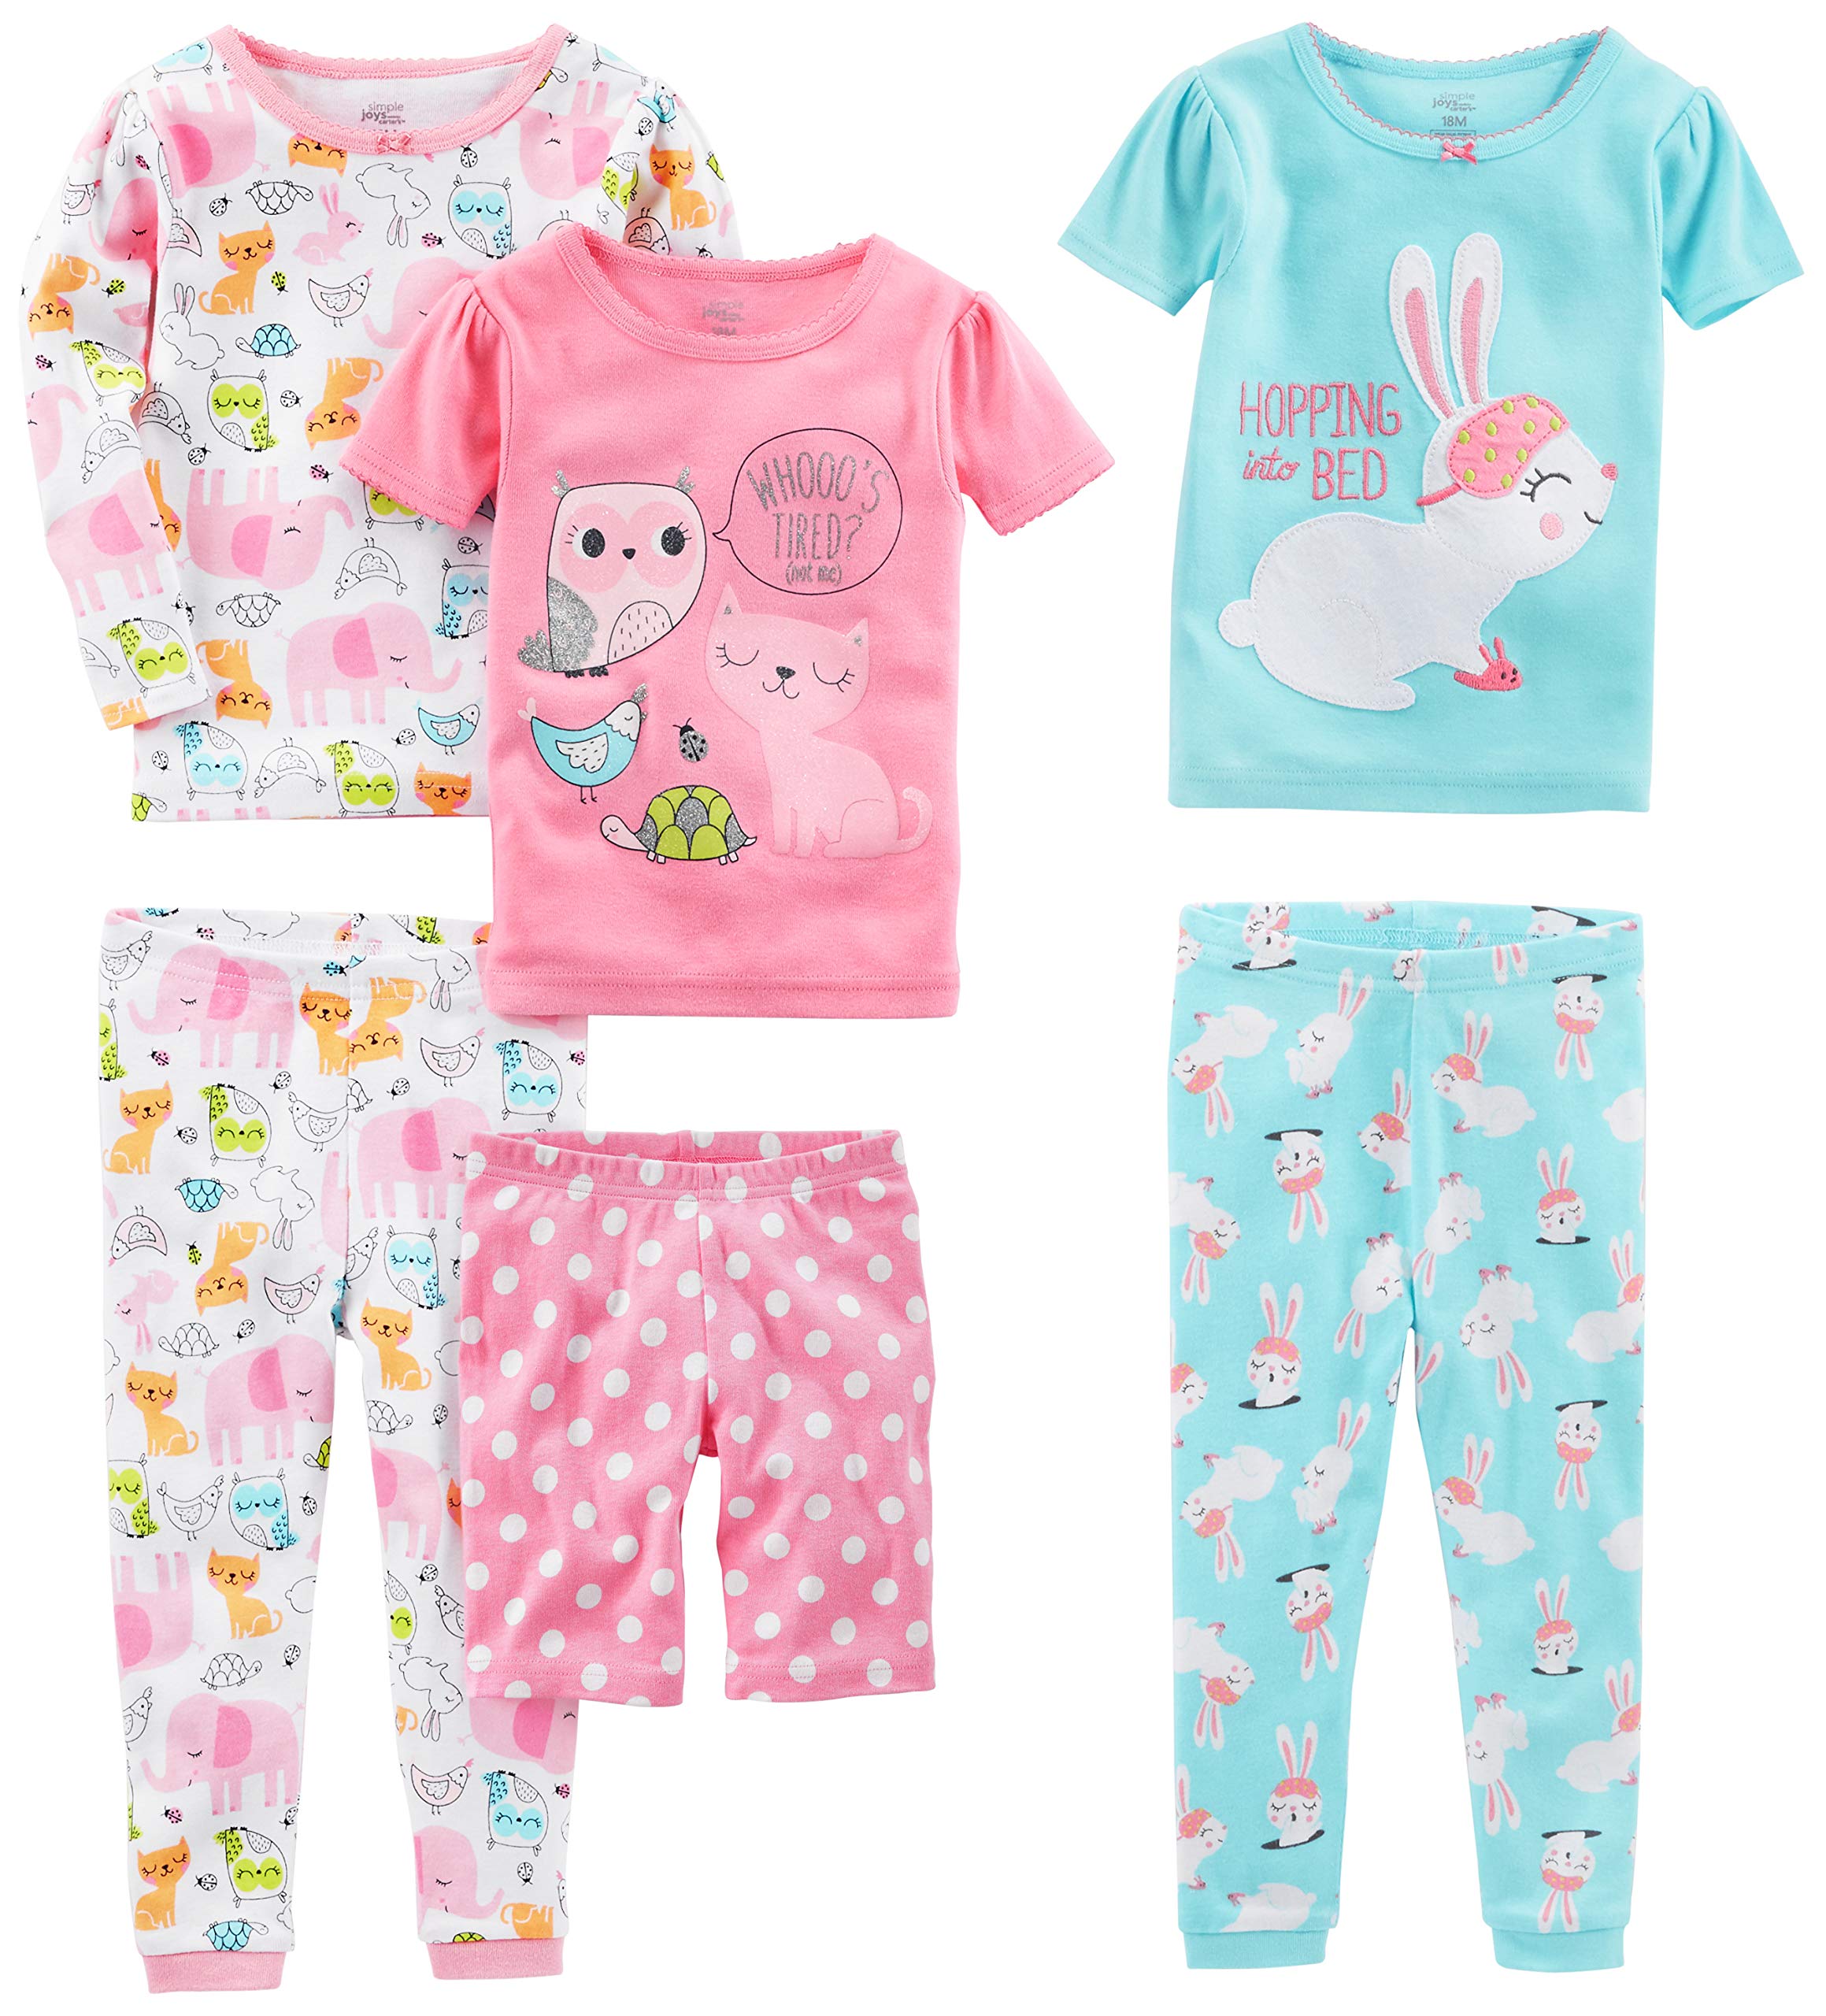 Simple Joys by Carter's Babies, Toddlers, and Girls' 6-Piece Snug-Fit Cotton Pajama Set, Pack of 3